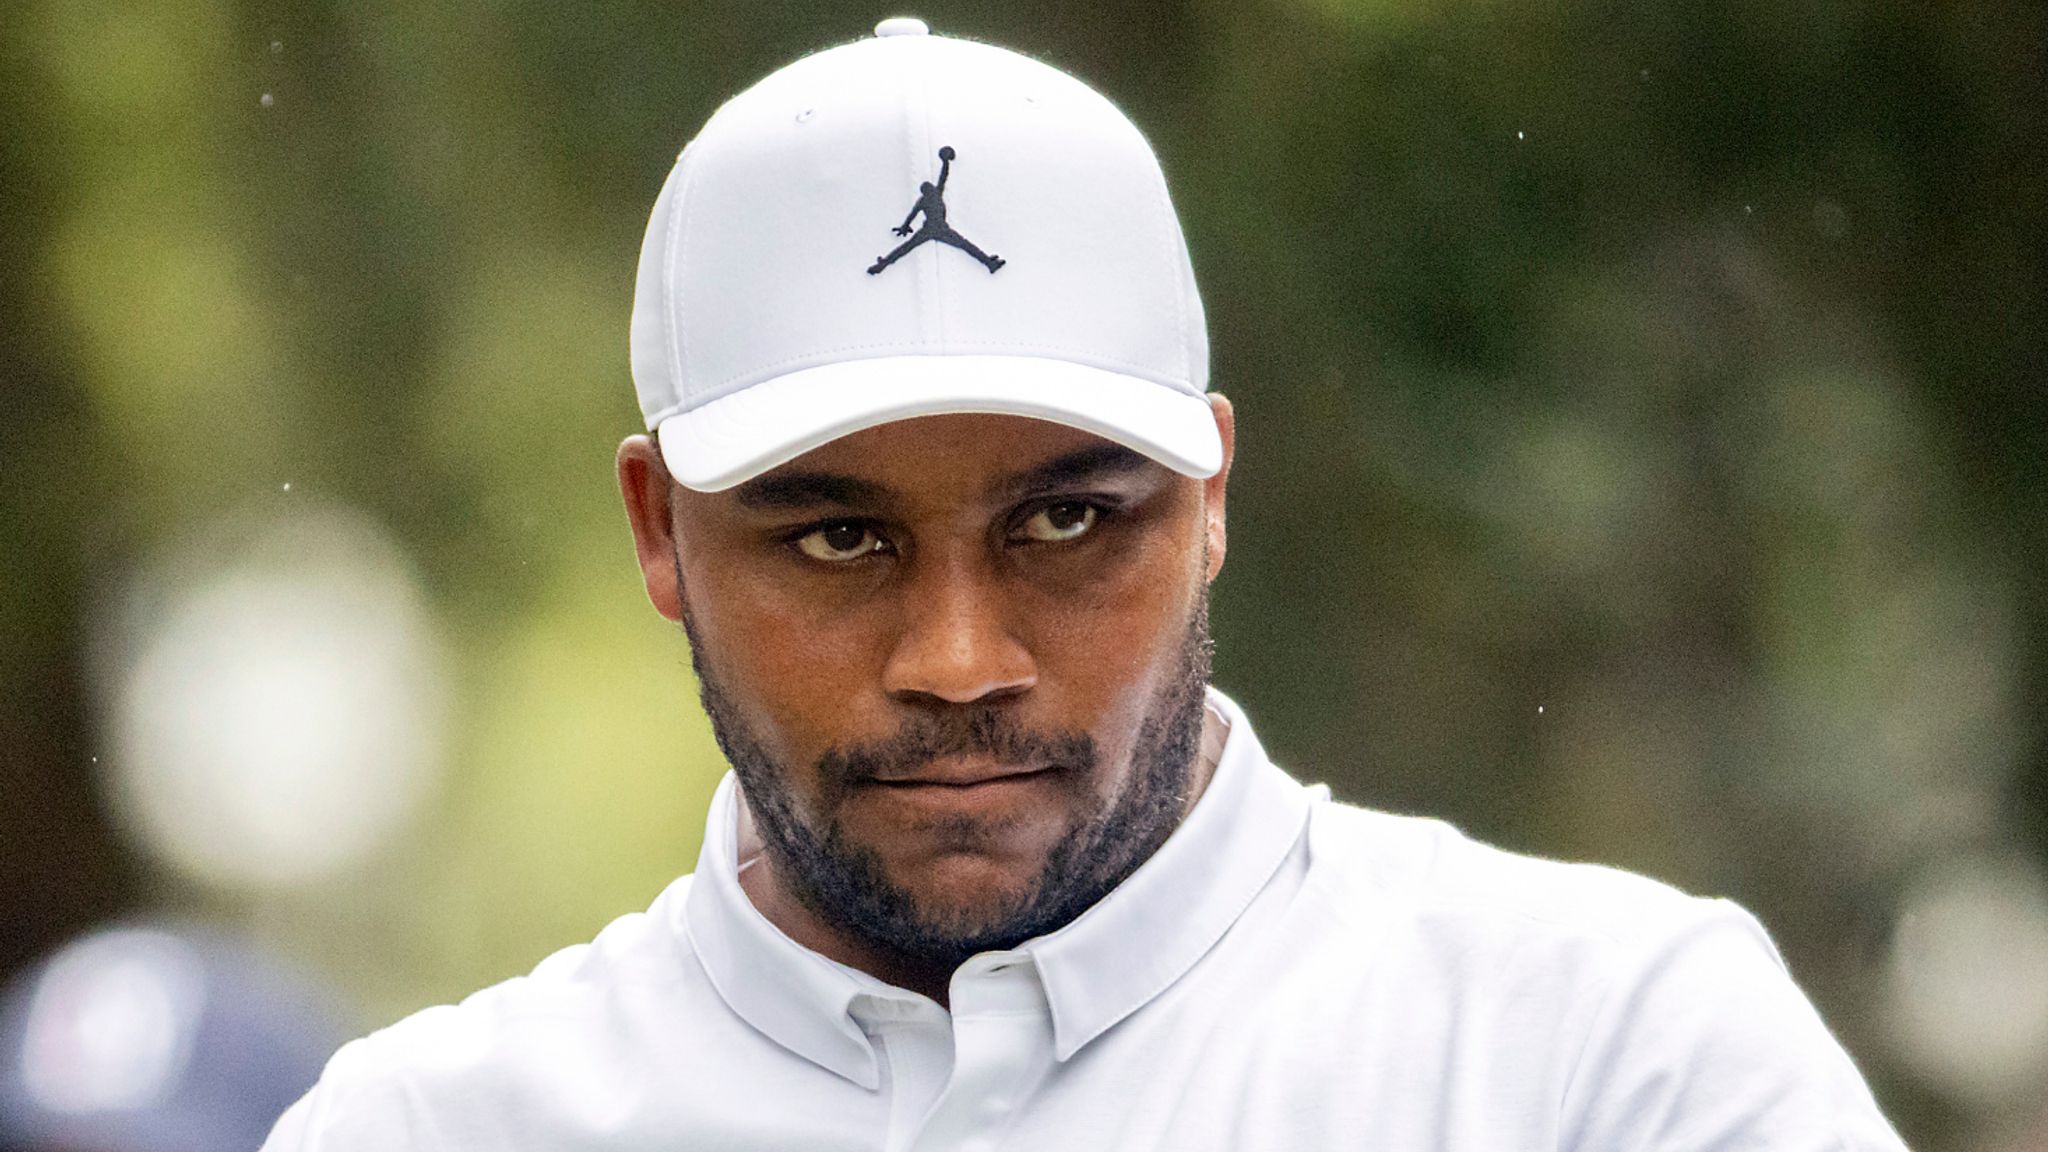 RBC Heritage Shane Lowry, Tommy Fleetwood in contention as Harold Varner III holds narrow lead Golf News Sky Sports